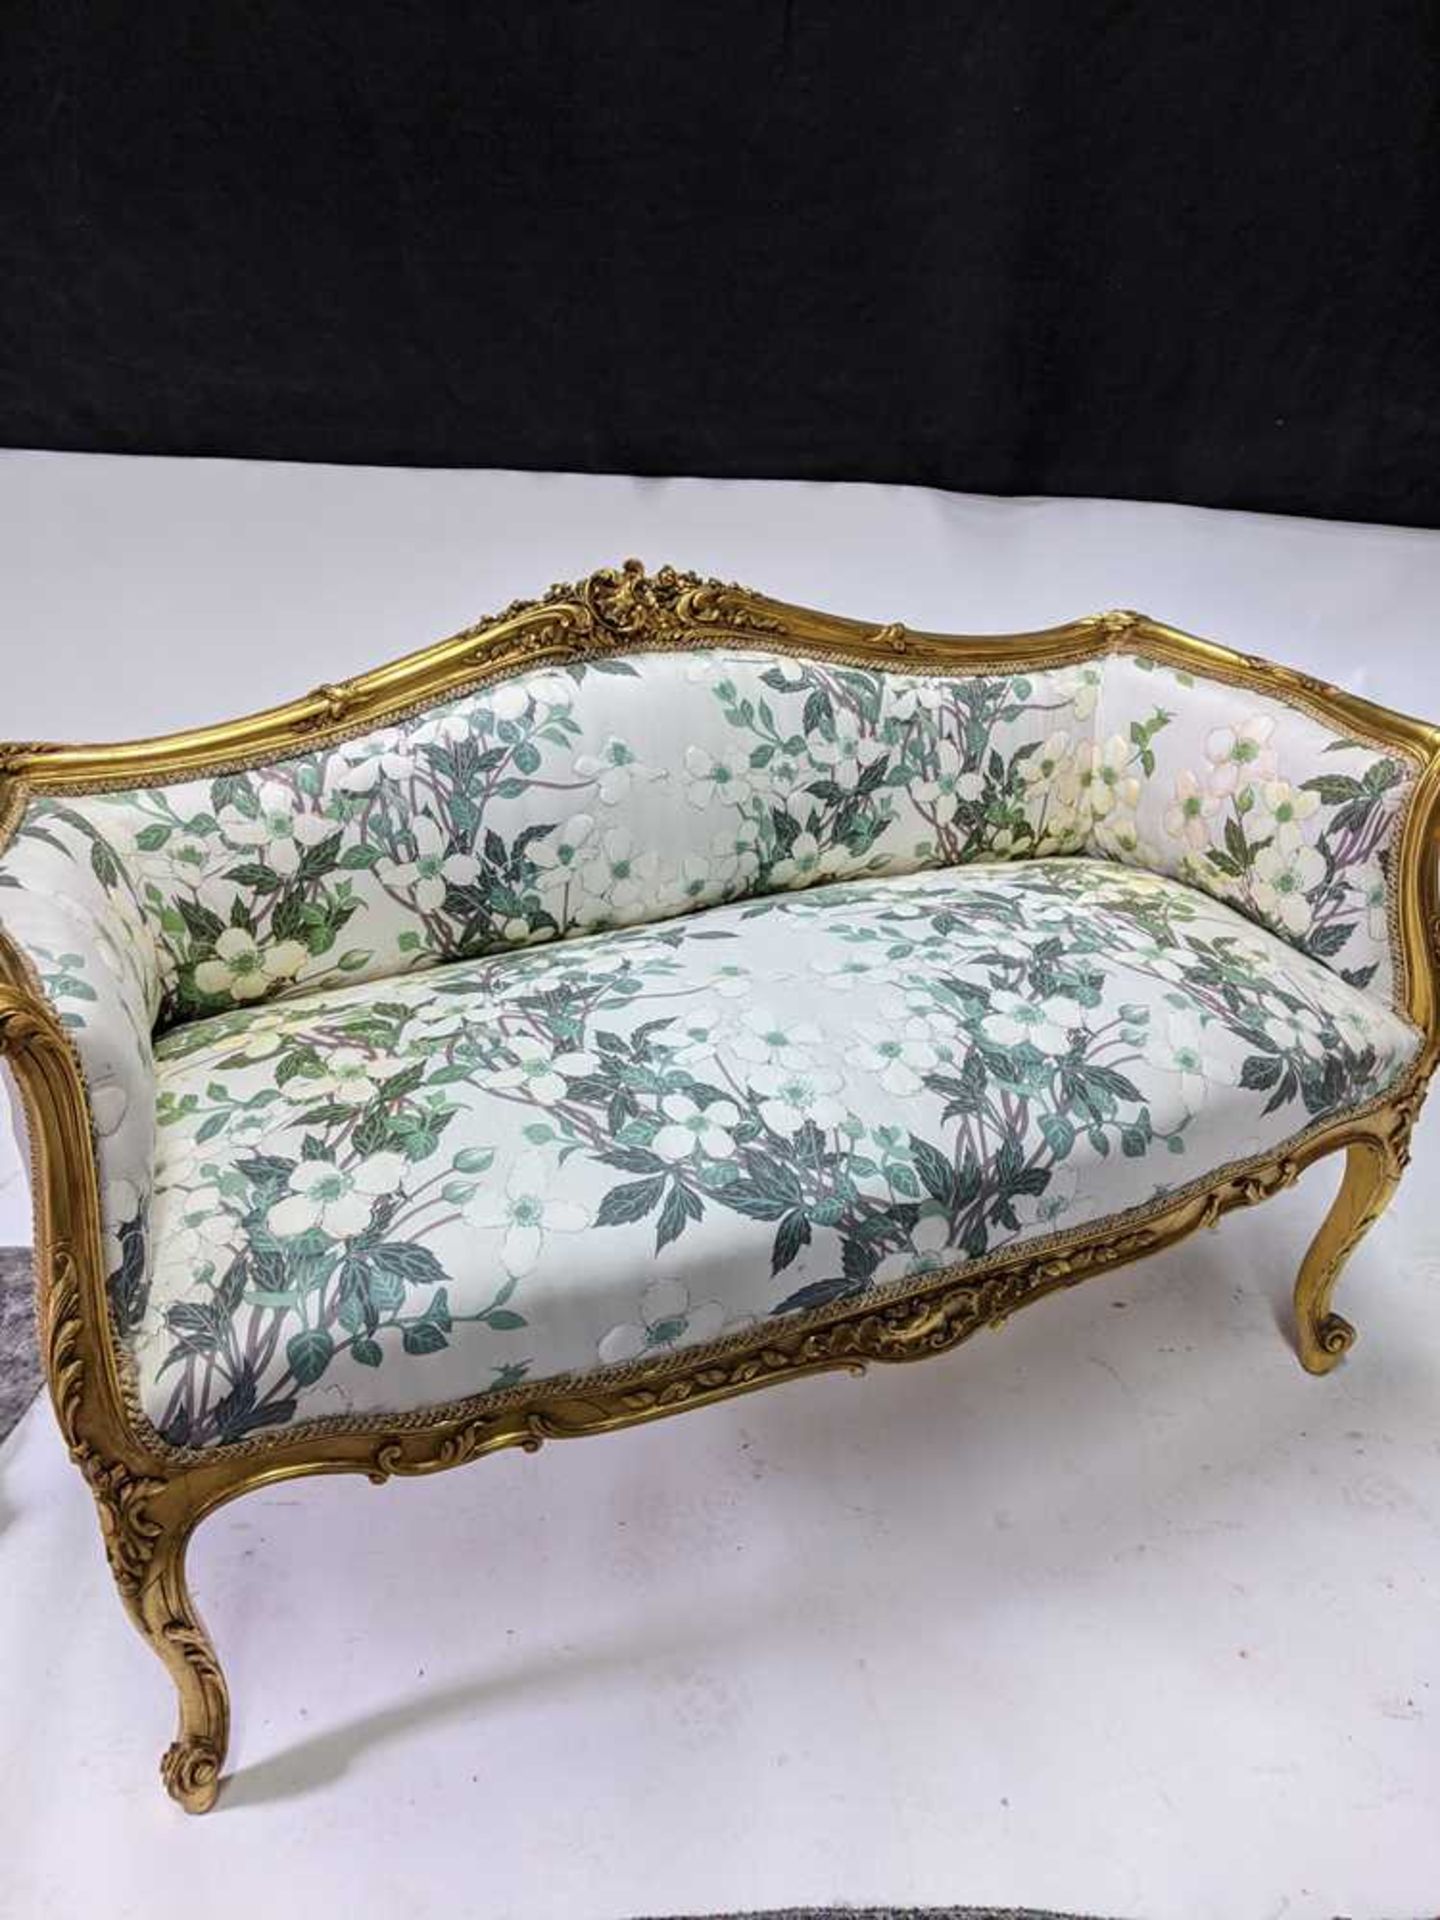 ROCOCO REVIVAL GILTWOOD WINDOW SEAT 19TH CENTURY - Image 4 of 11